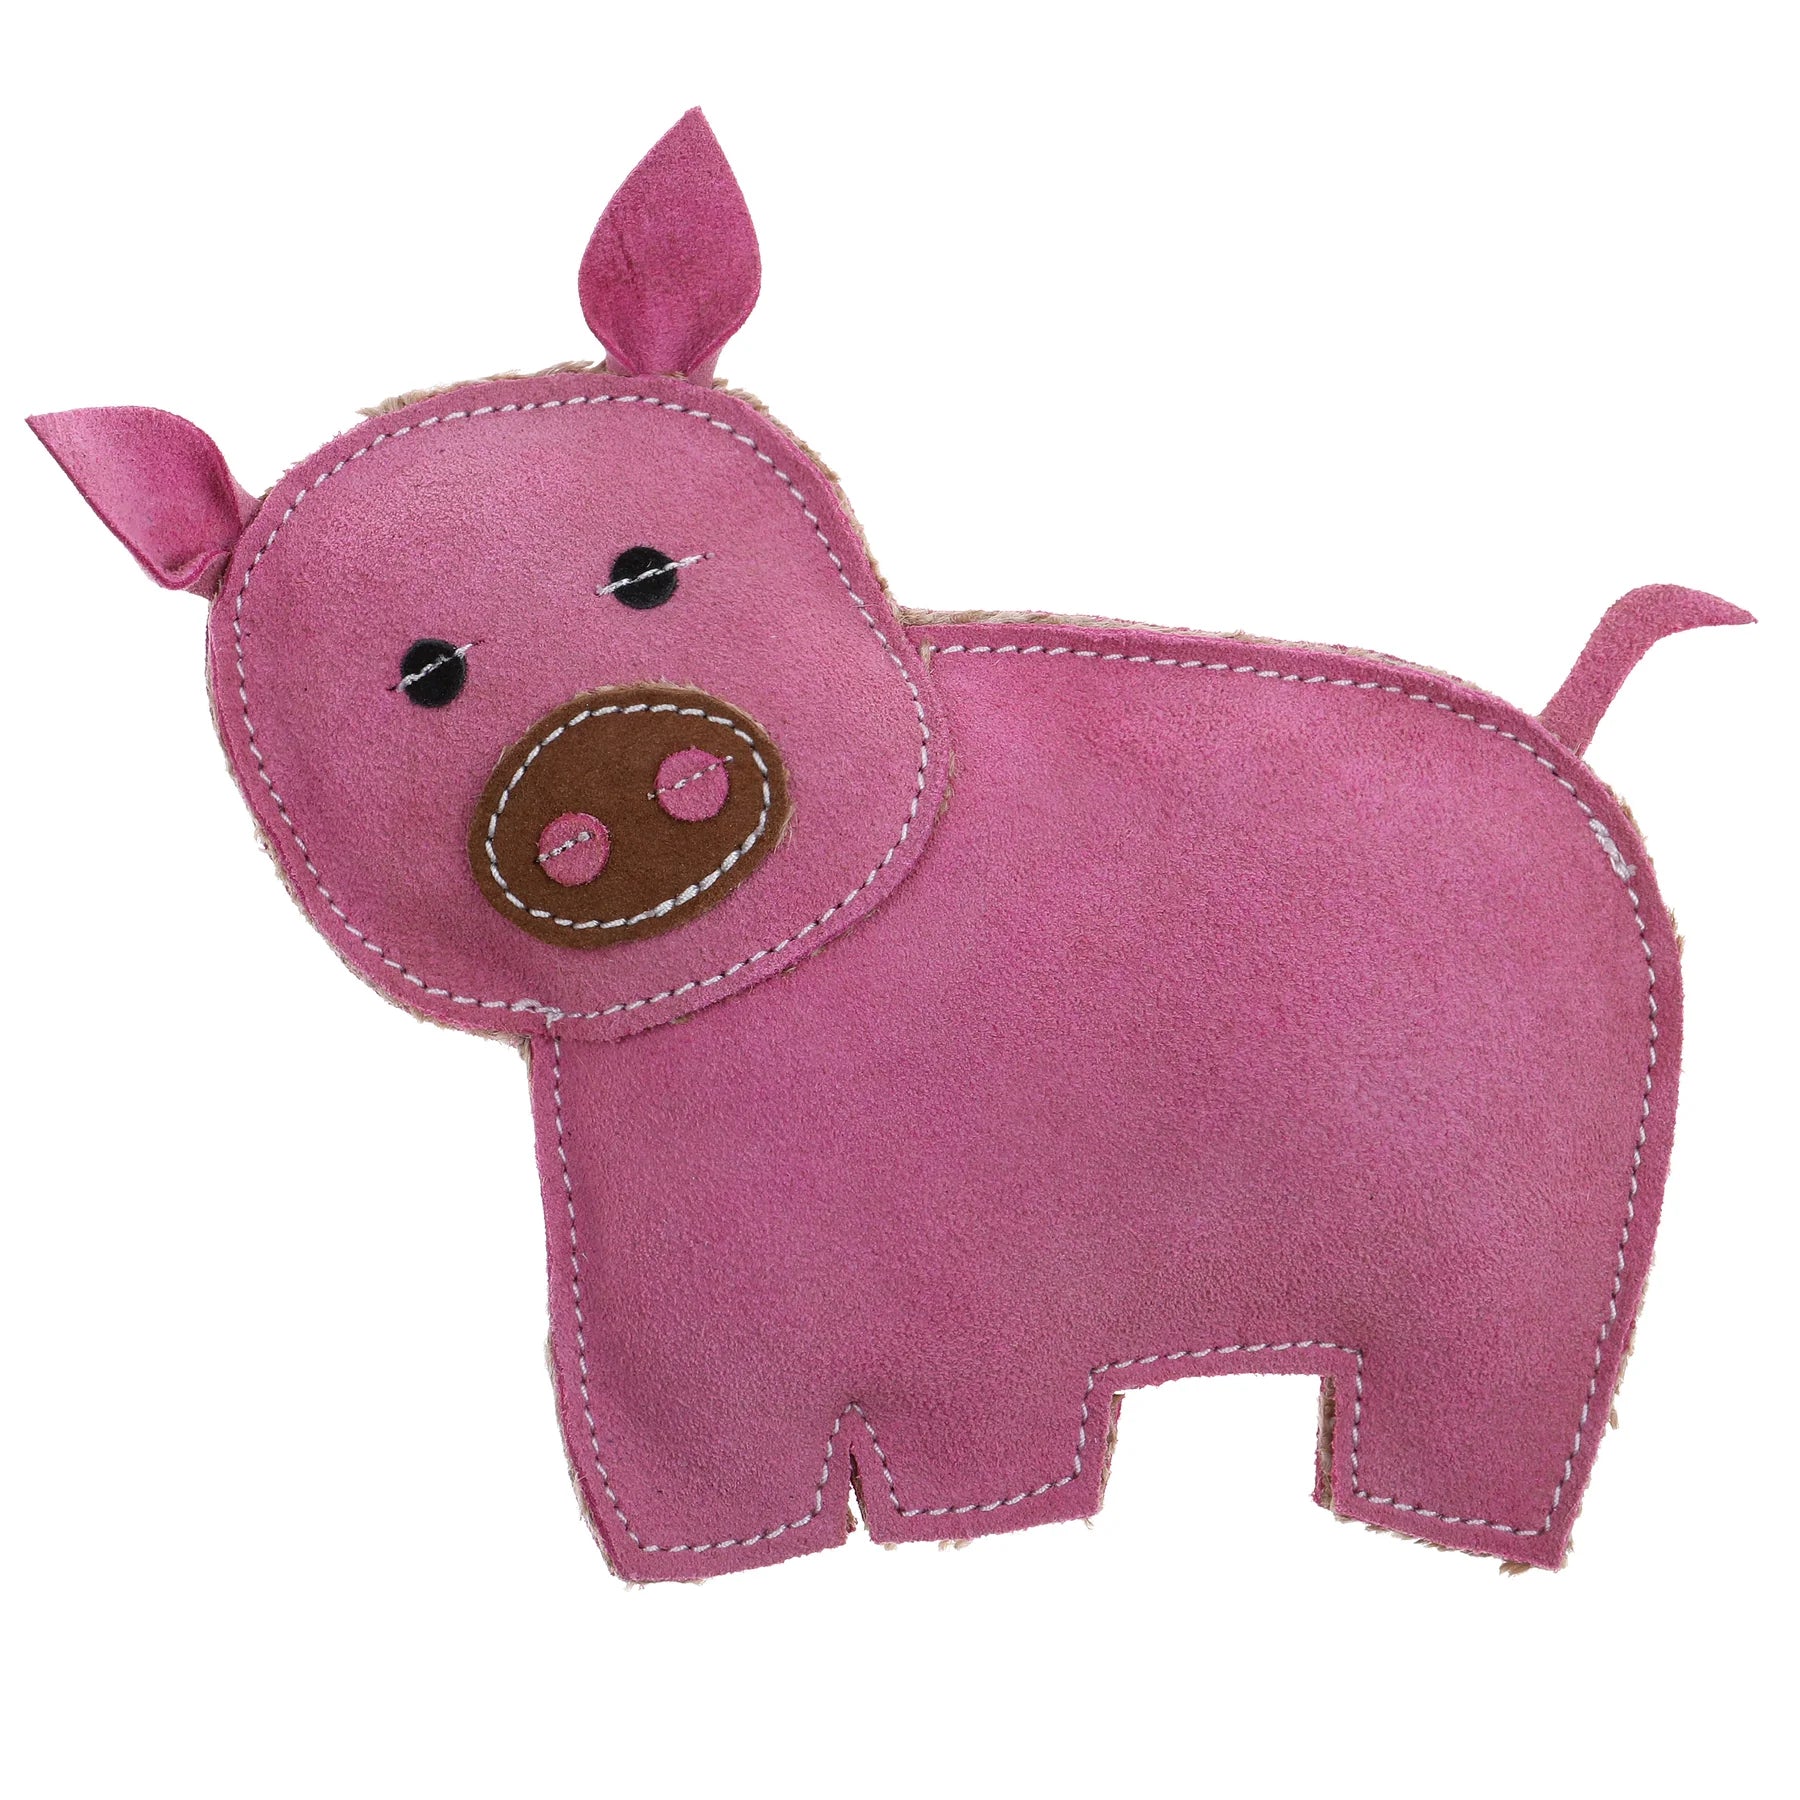 Doog Country Tails Pig Chew Toy Pink 7.08" x 1.18" x 7.08"